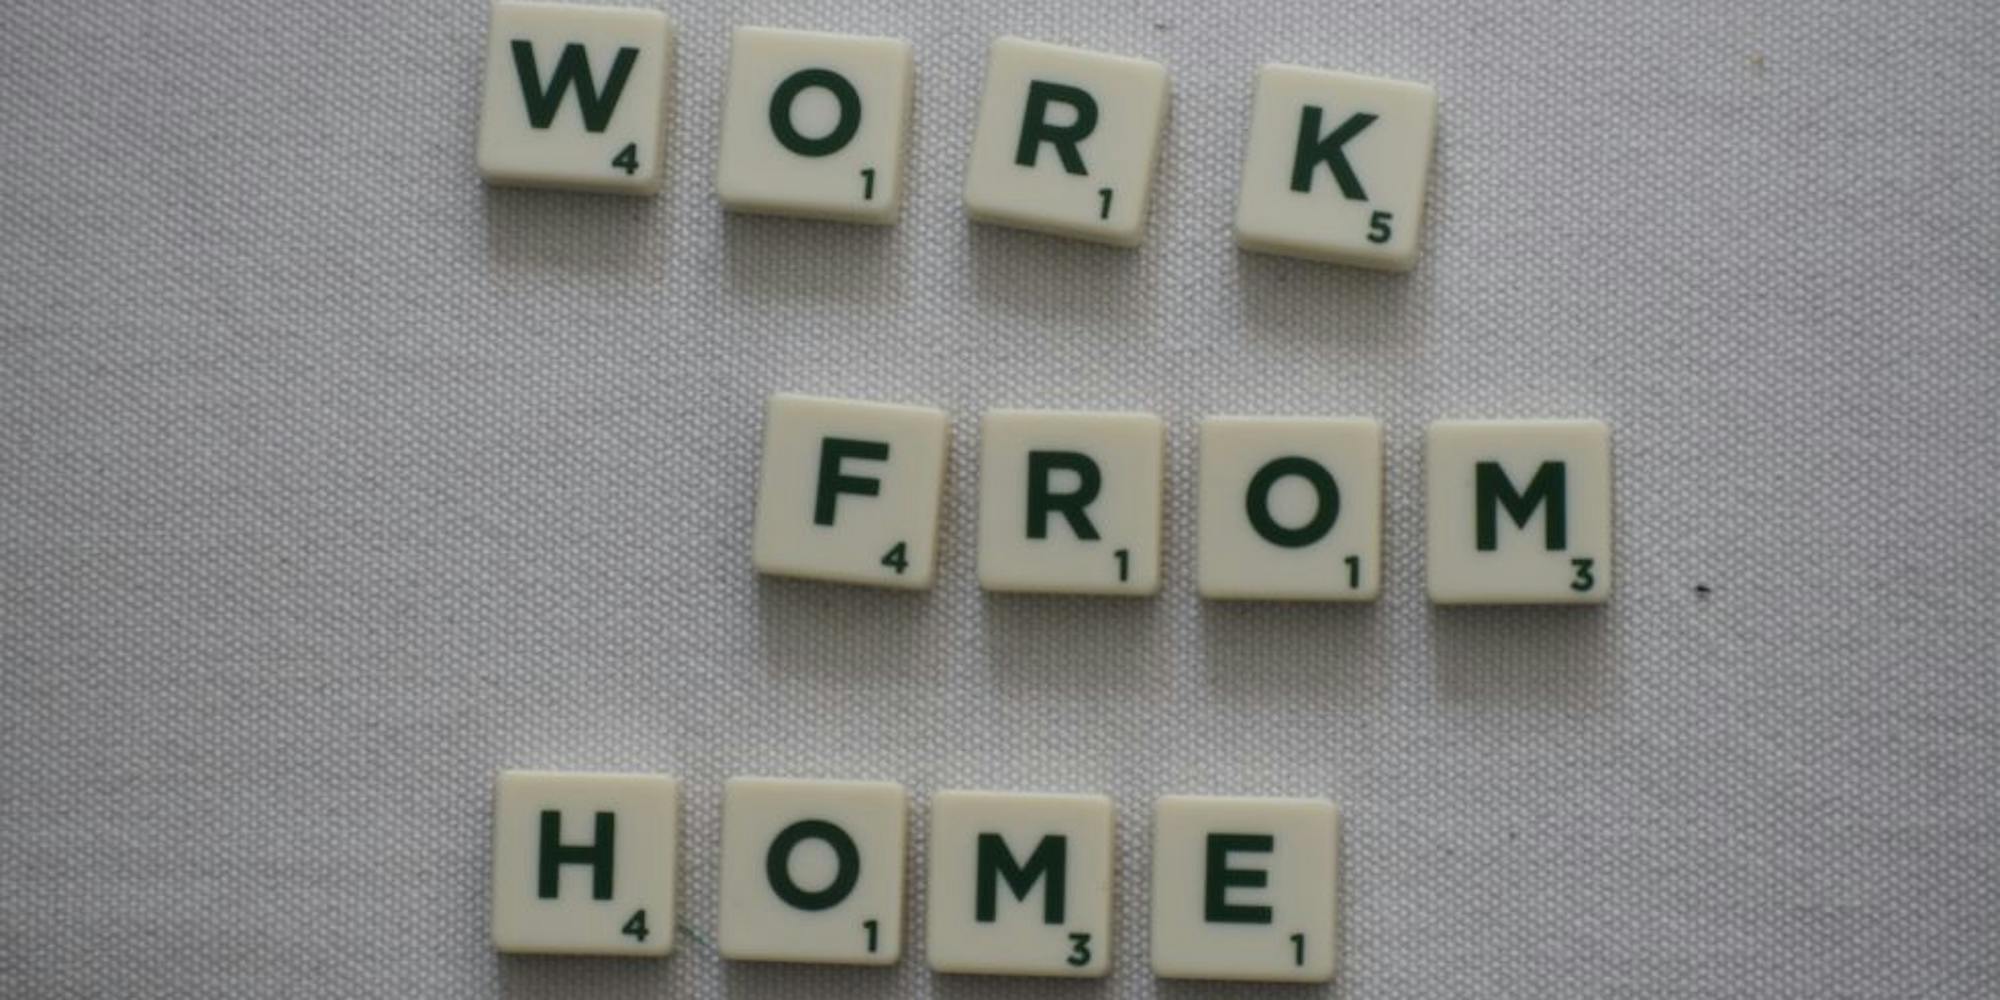 Scrabble tiles forming the words "Work from home"